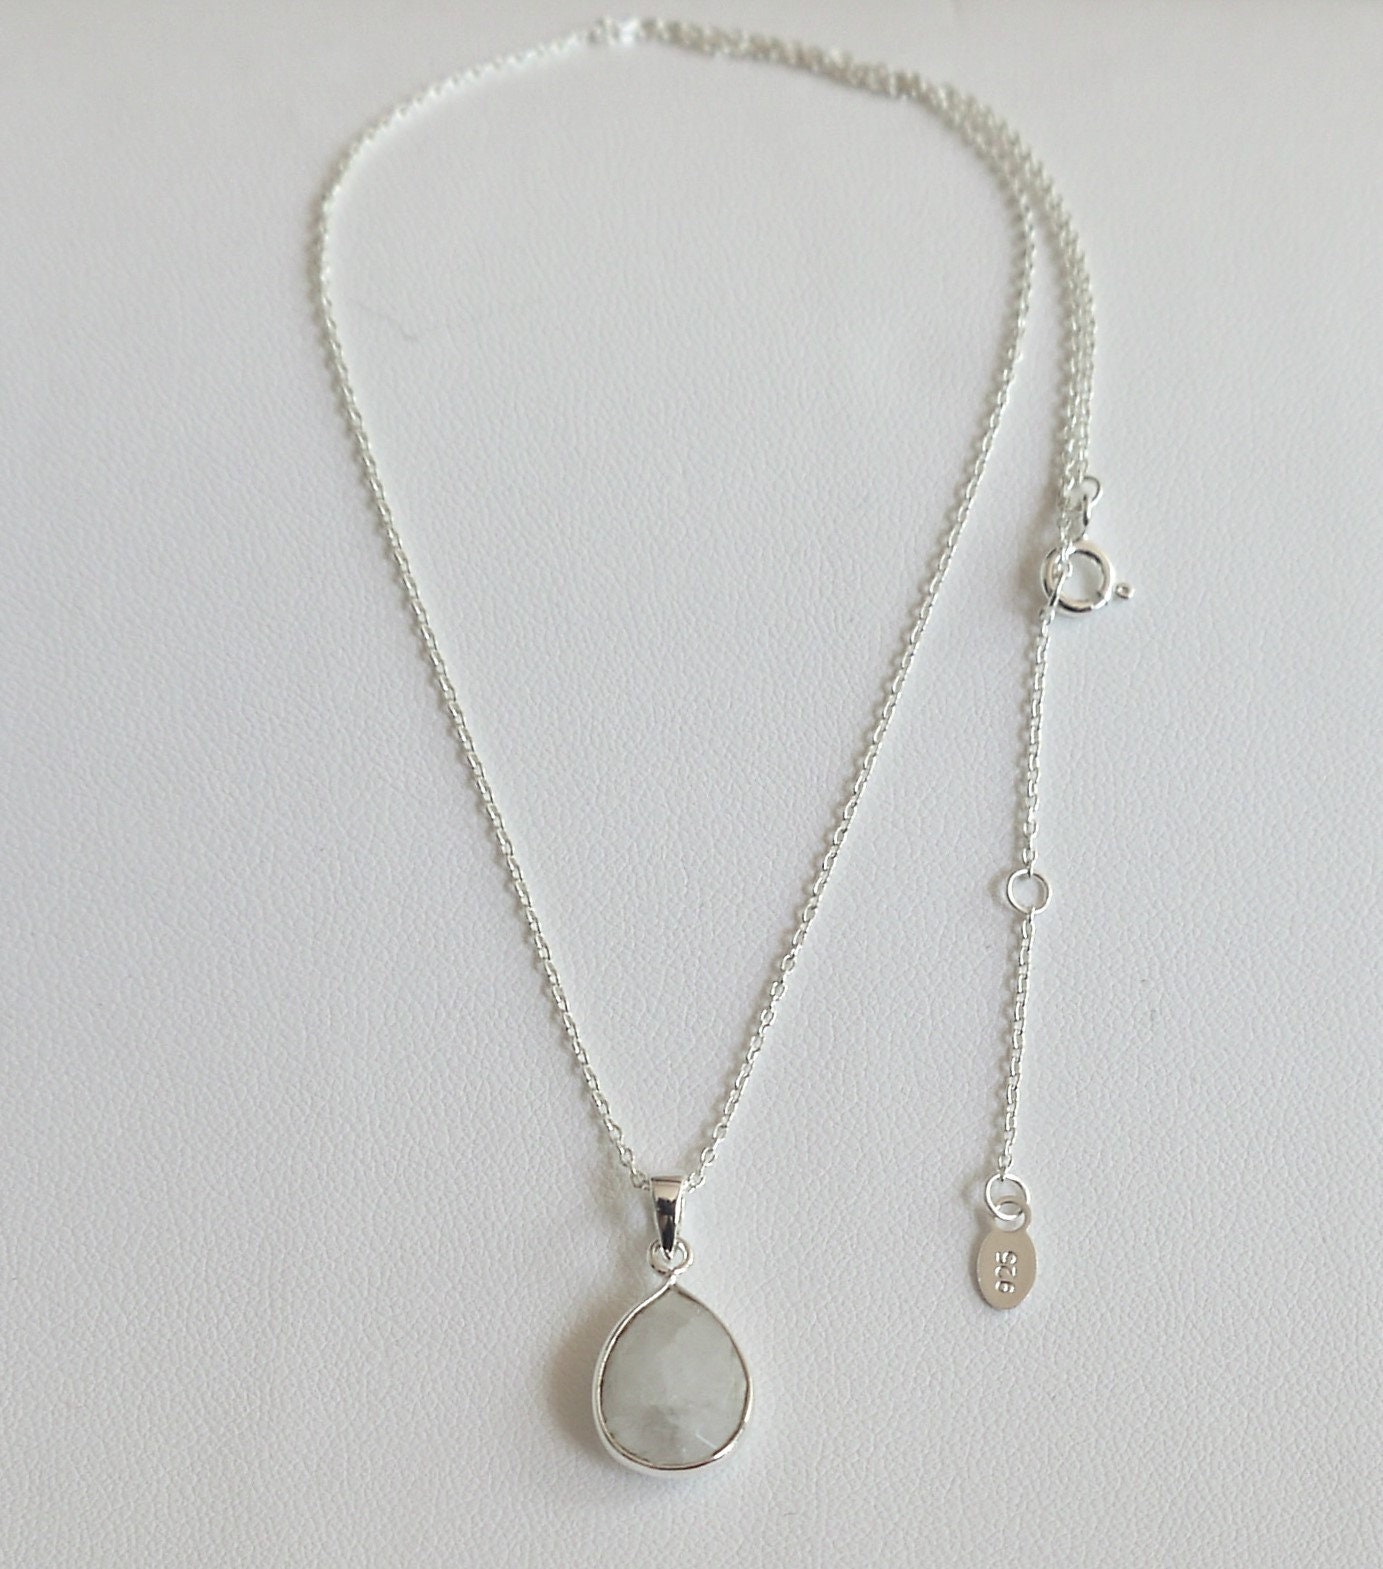 Necklace 725 Silver With Rainbow Moonstone. Stone Neclace - Etsy